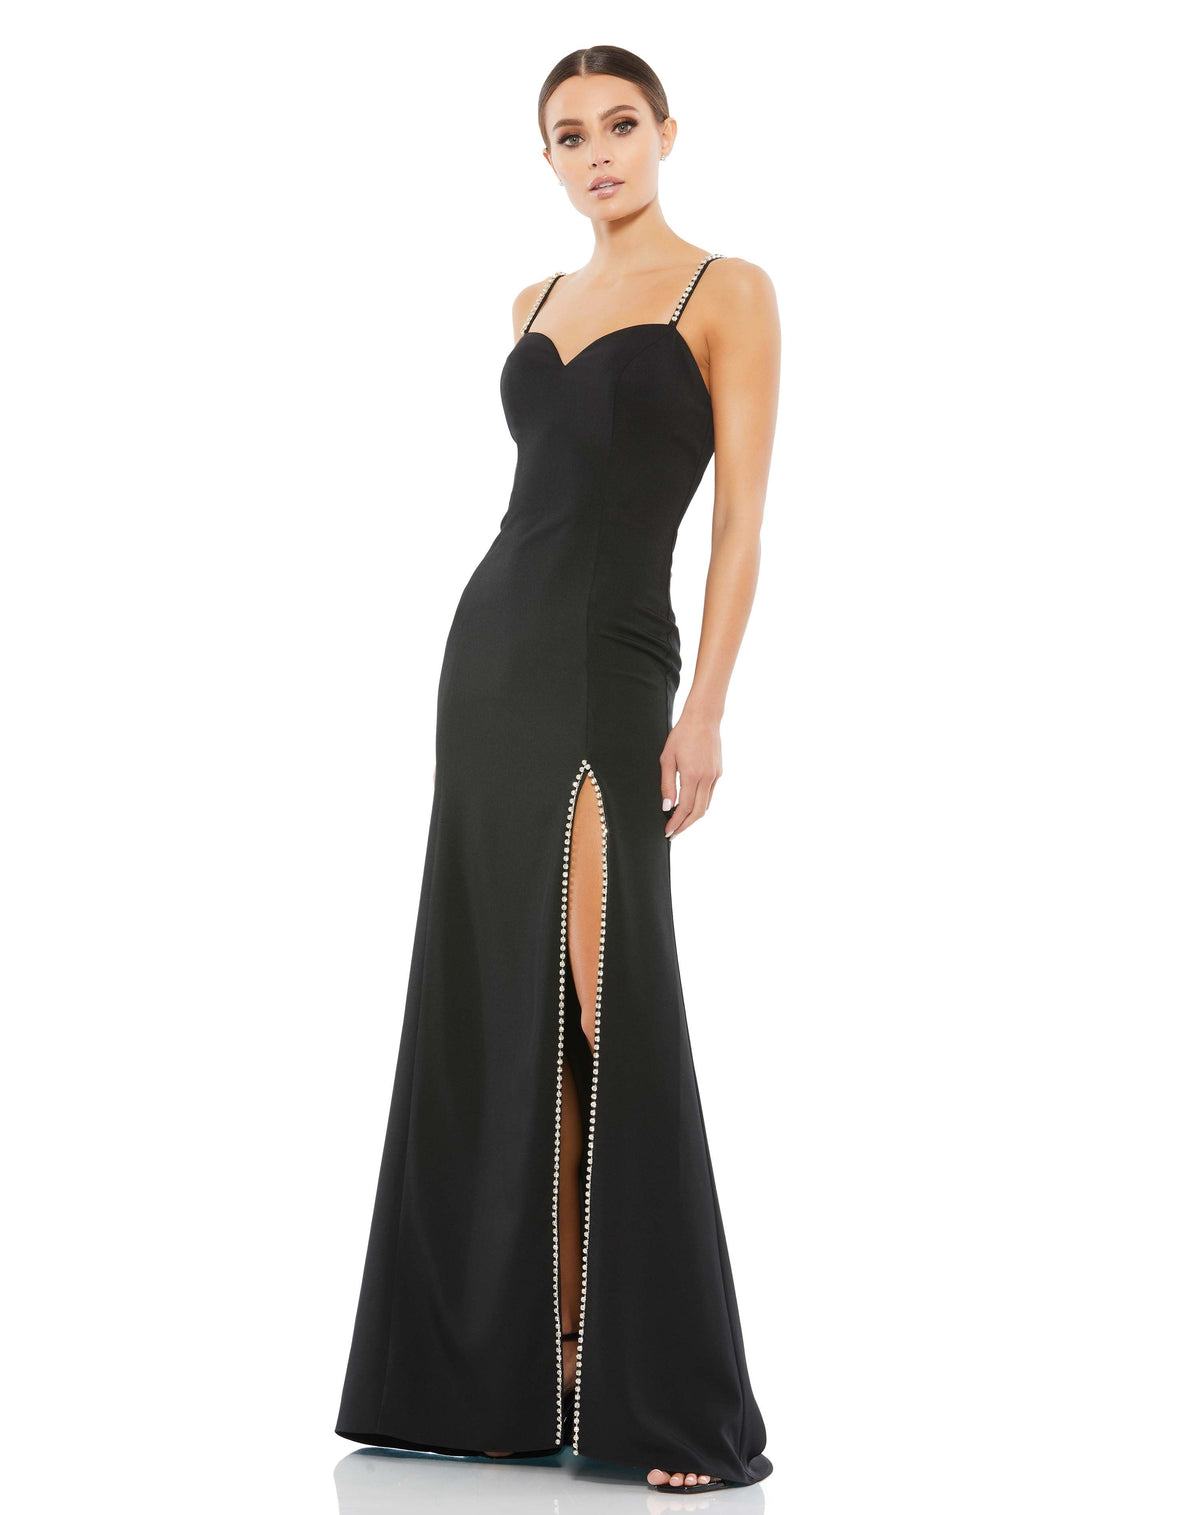 This elegant Mac Duggal, long black evening gown with elegant rhinestone detail and a sexy thigh high split is an elegant evening dress is the perfect dress perfect for proms, black-tie affairs, weddings and special events!